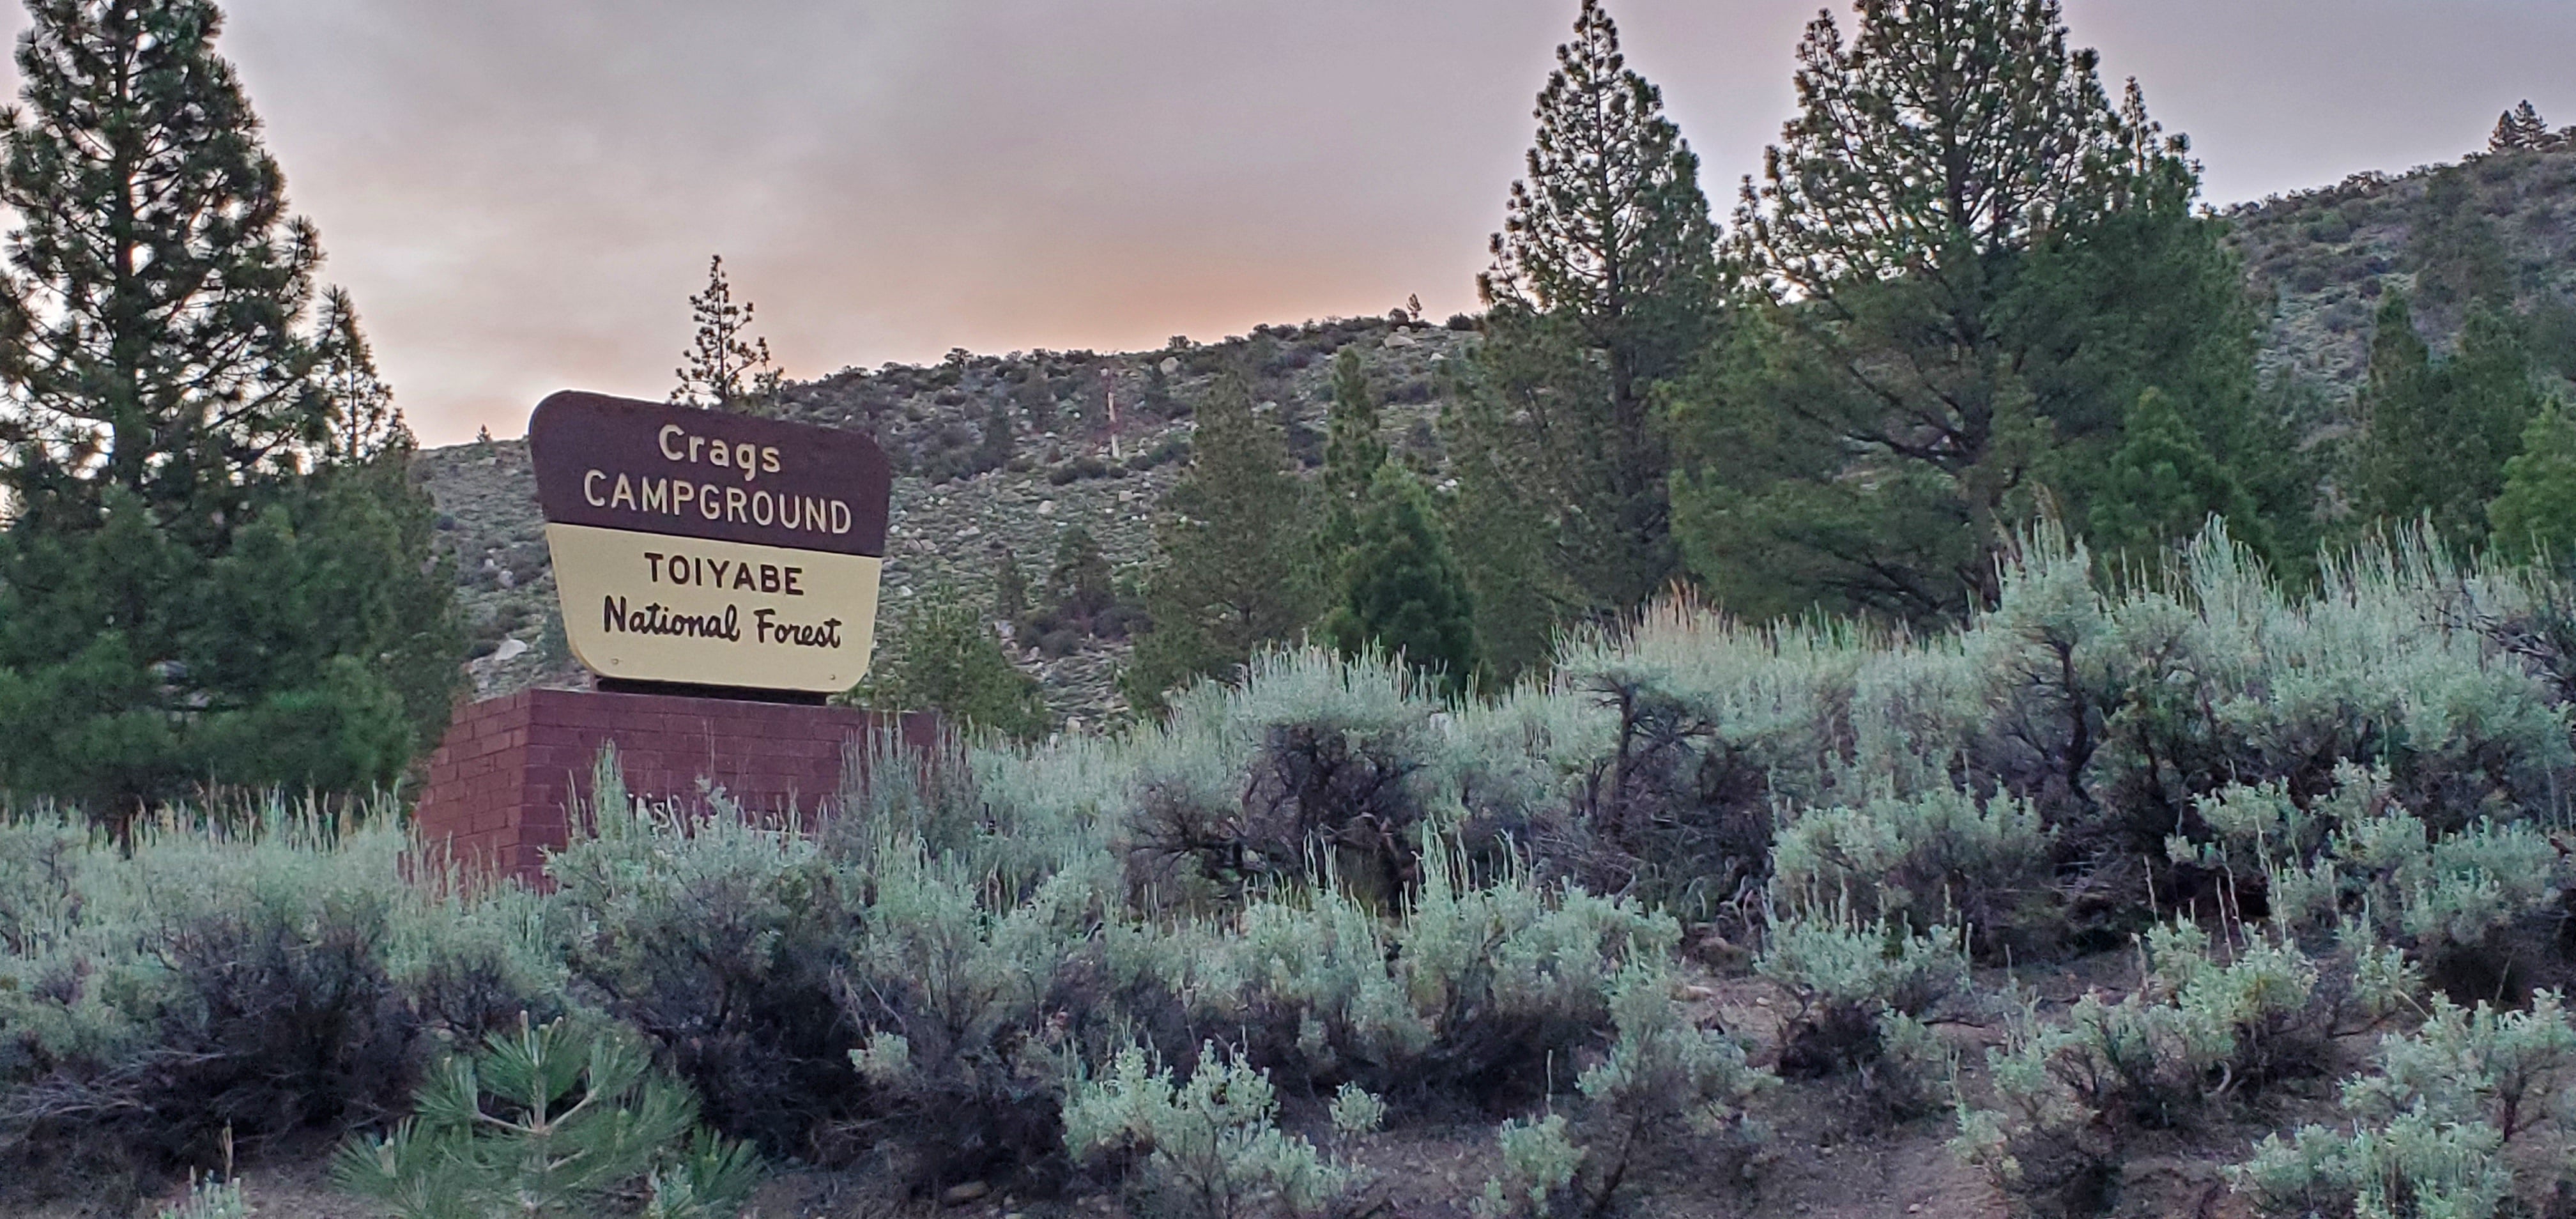 Camper submitted image from Toiyabe National Forest Crags Campground - 1